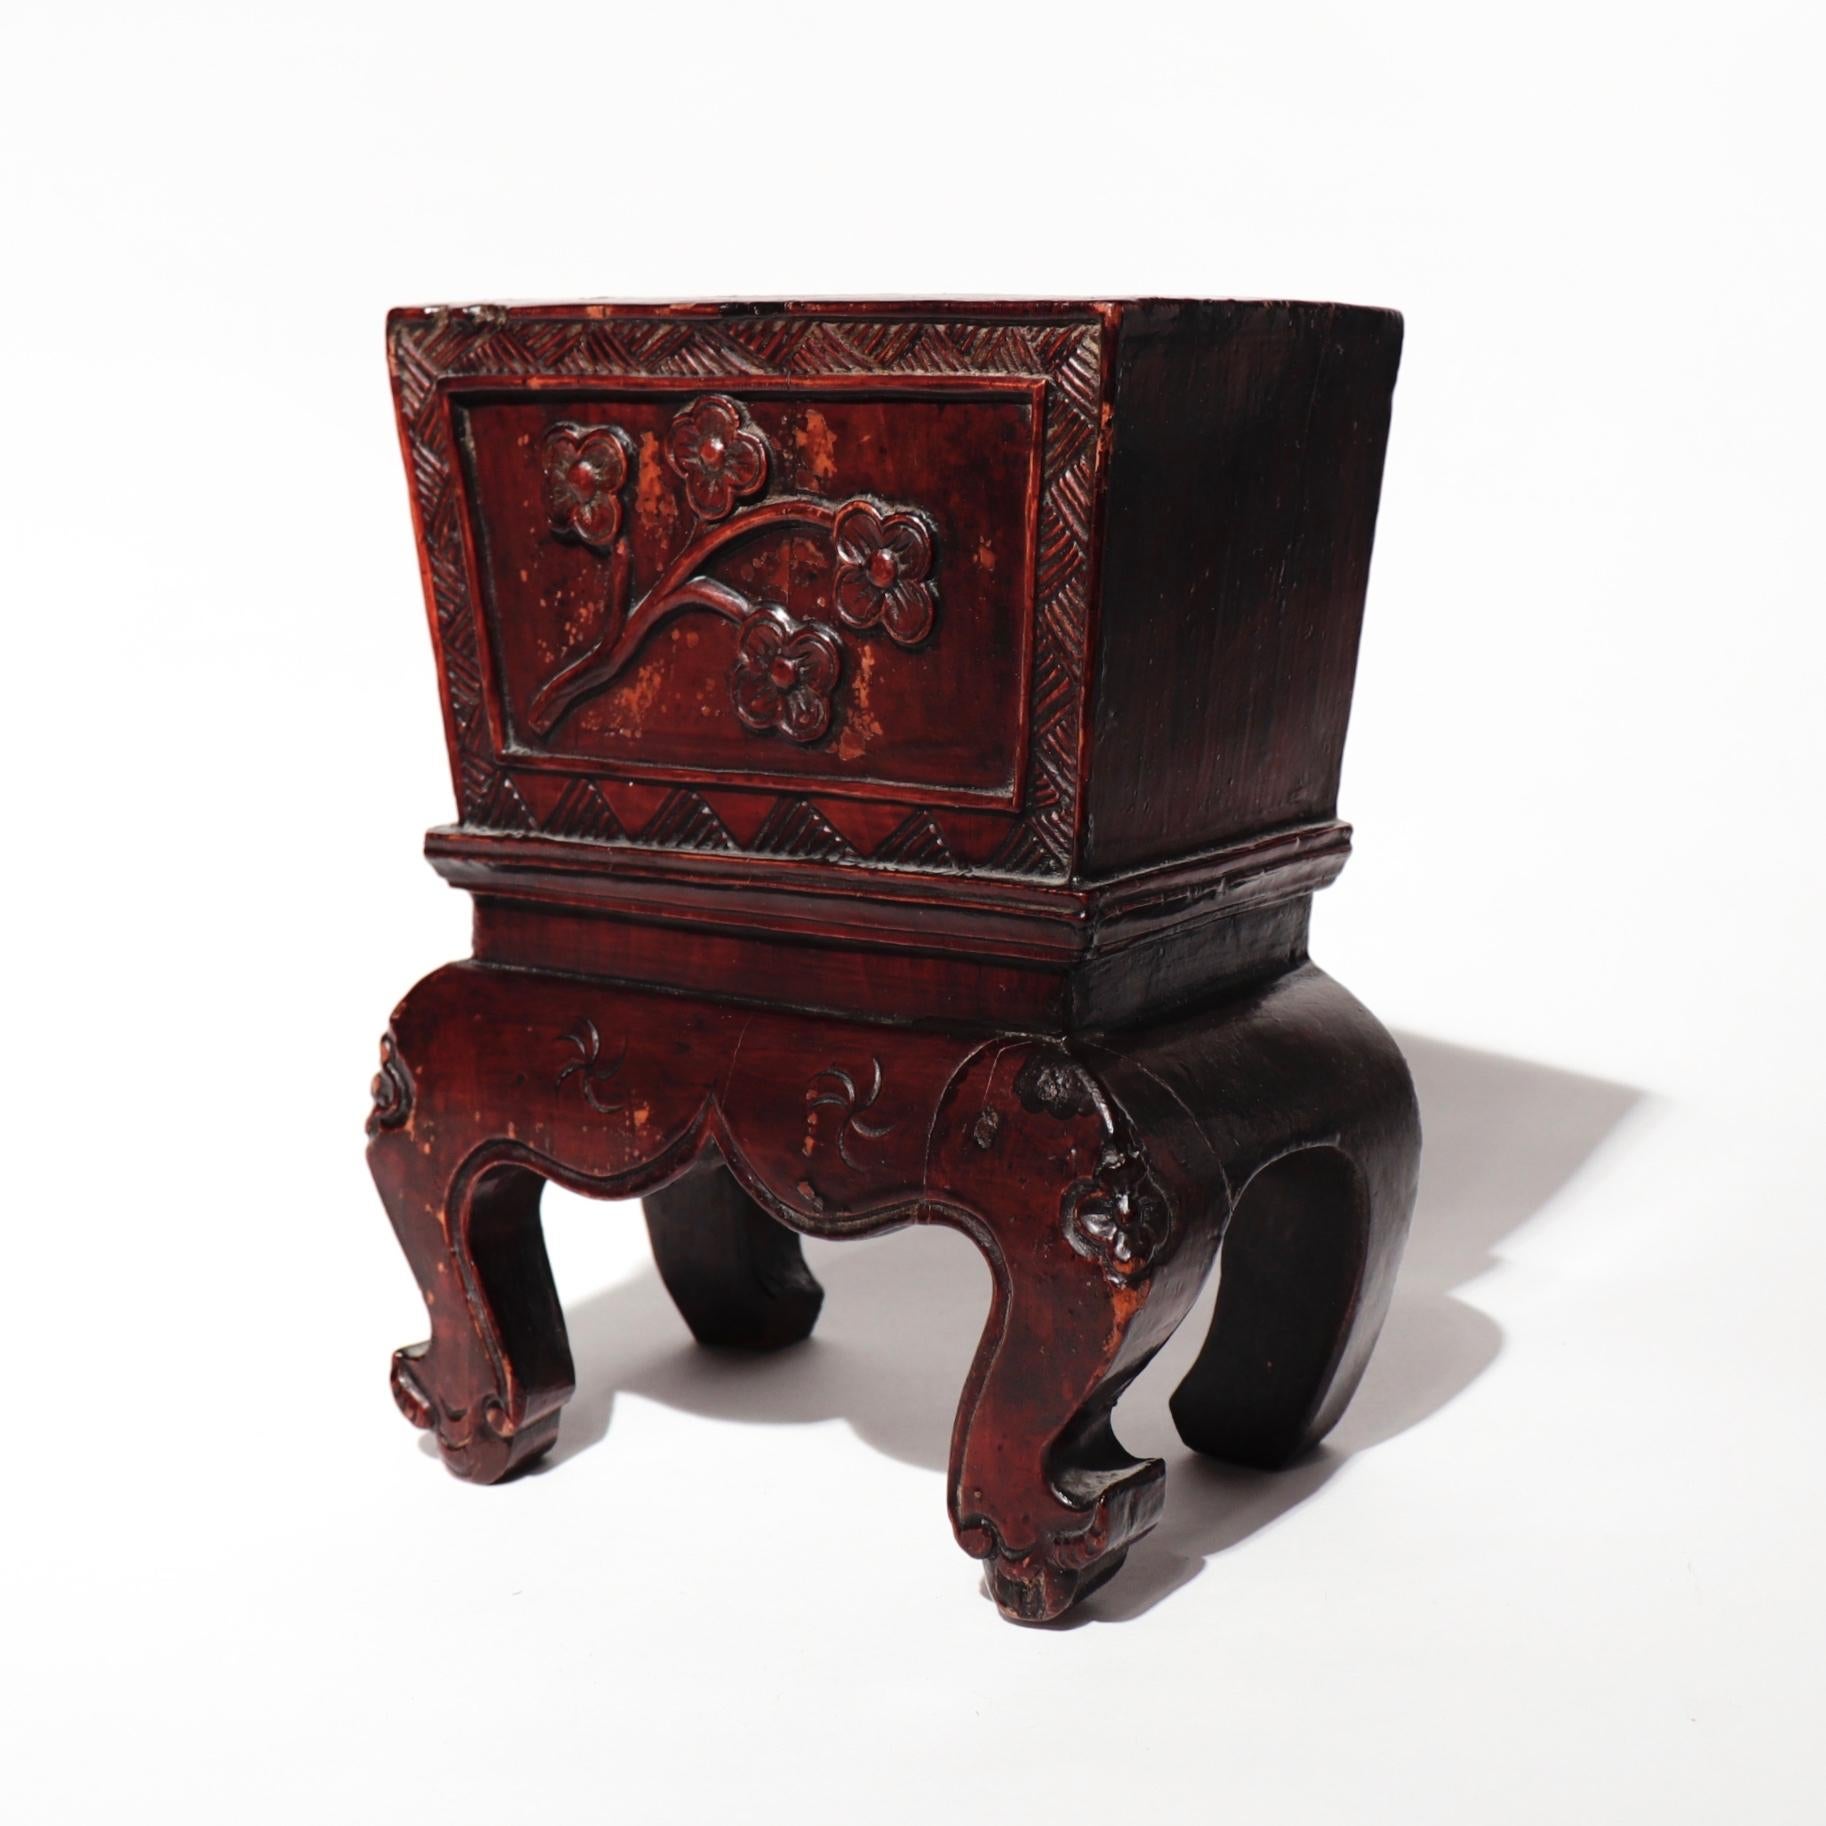 Chinese lacquered wood jardinière, small, elegant form carved from a single segment of wood, raised high on four cabriole curving legs, top consisting of a rectangular open box with slightly outward flaring sides, front panel decorated with a